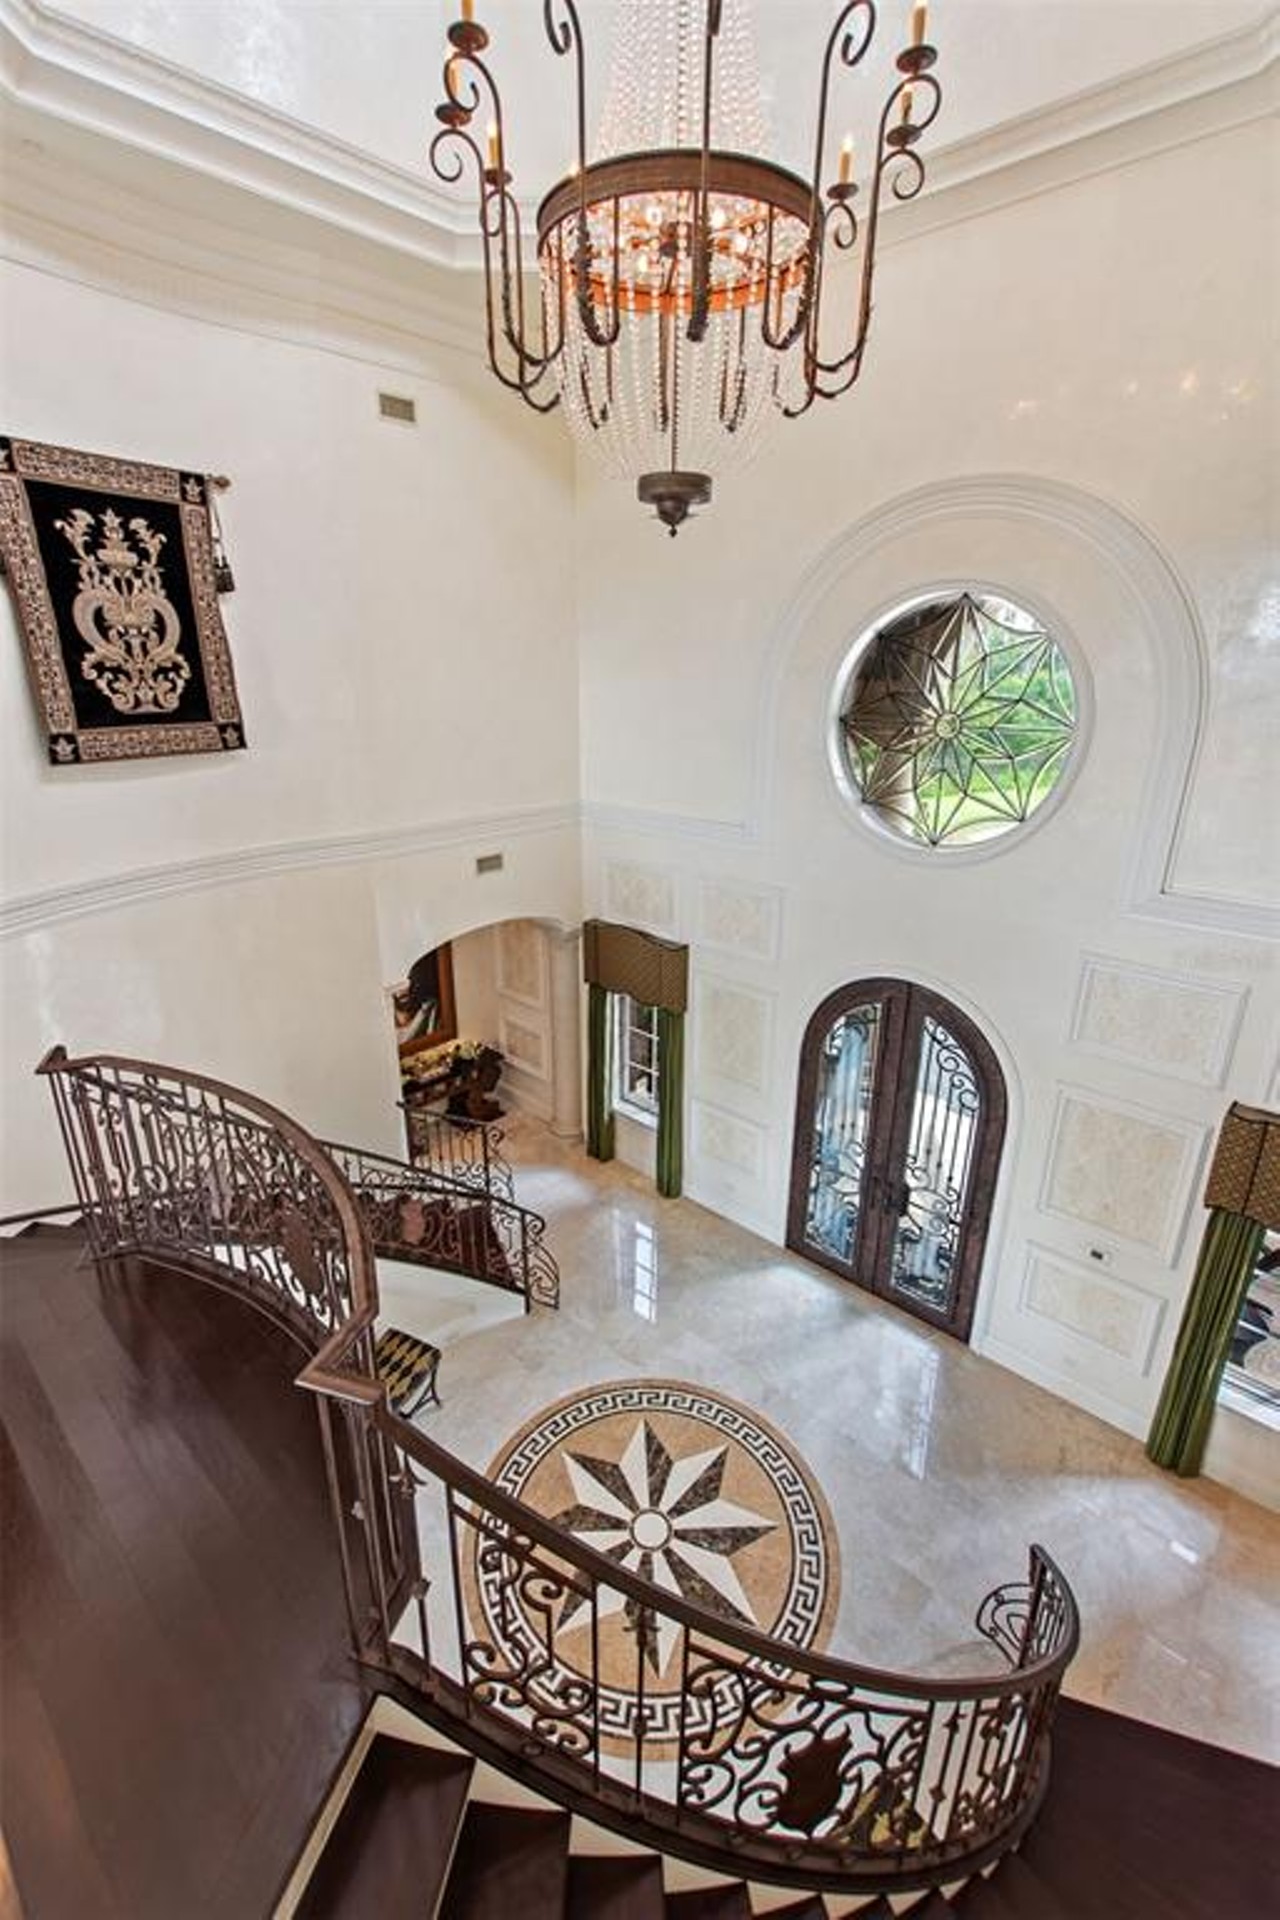 Former Miss Florida's Orlando mansion is now most-expensive home ever sold in Orange County